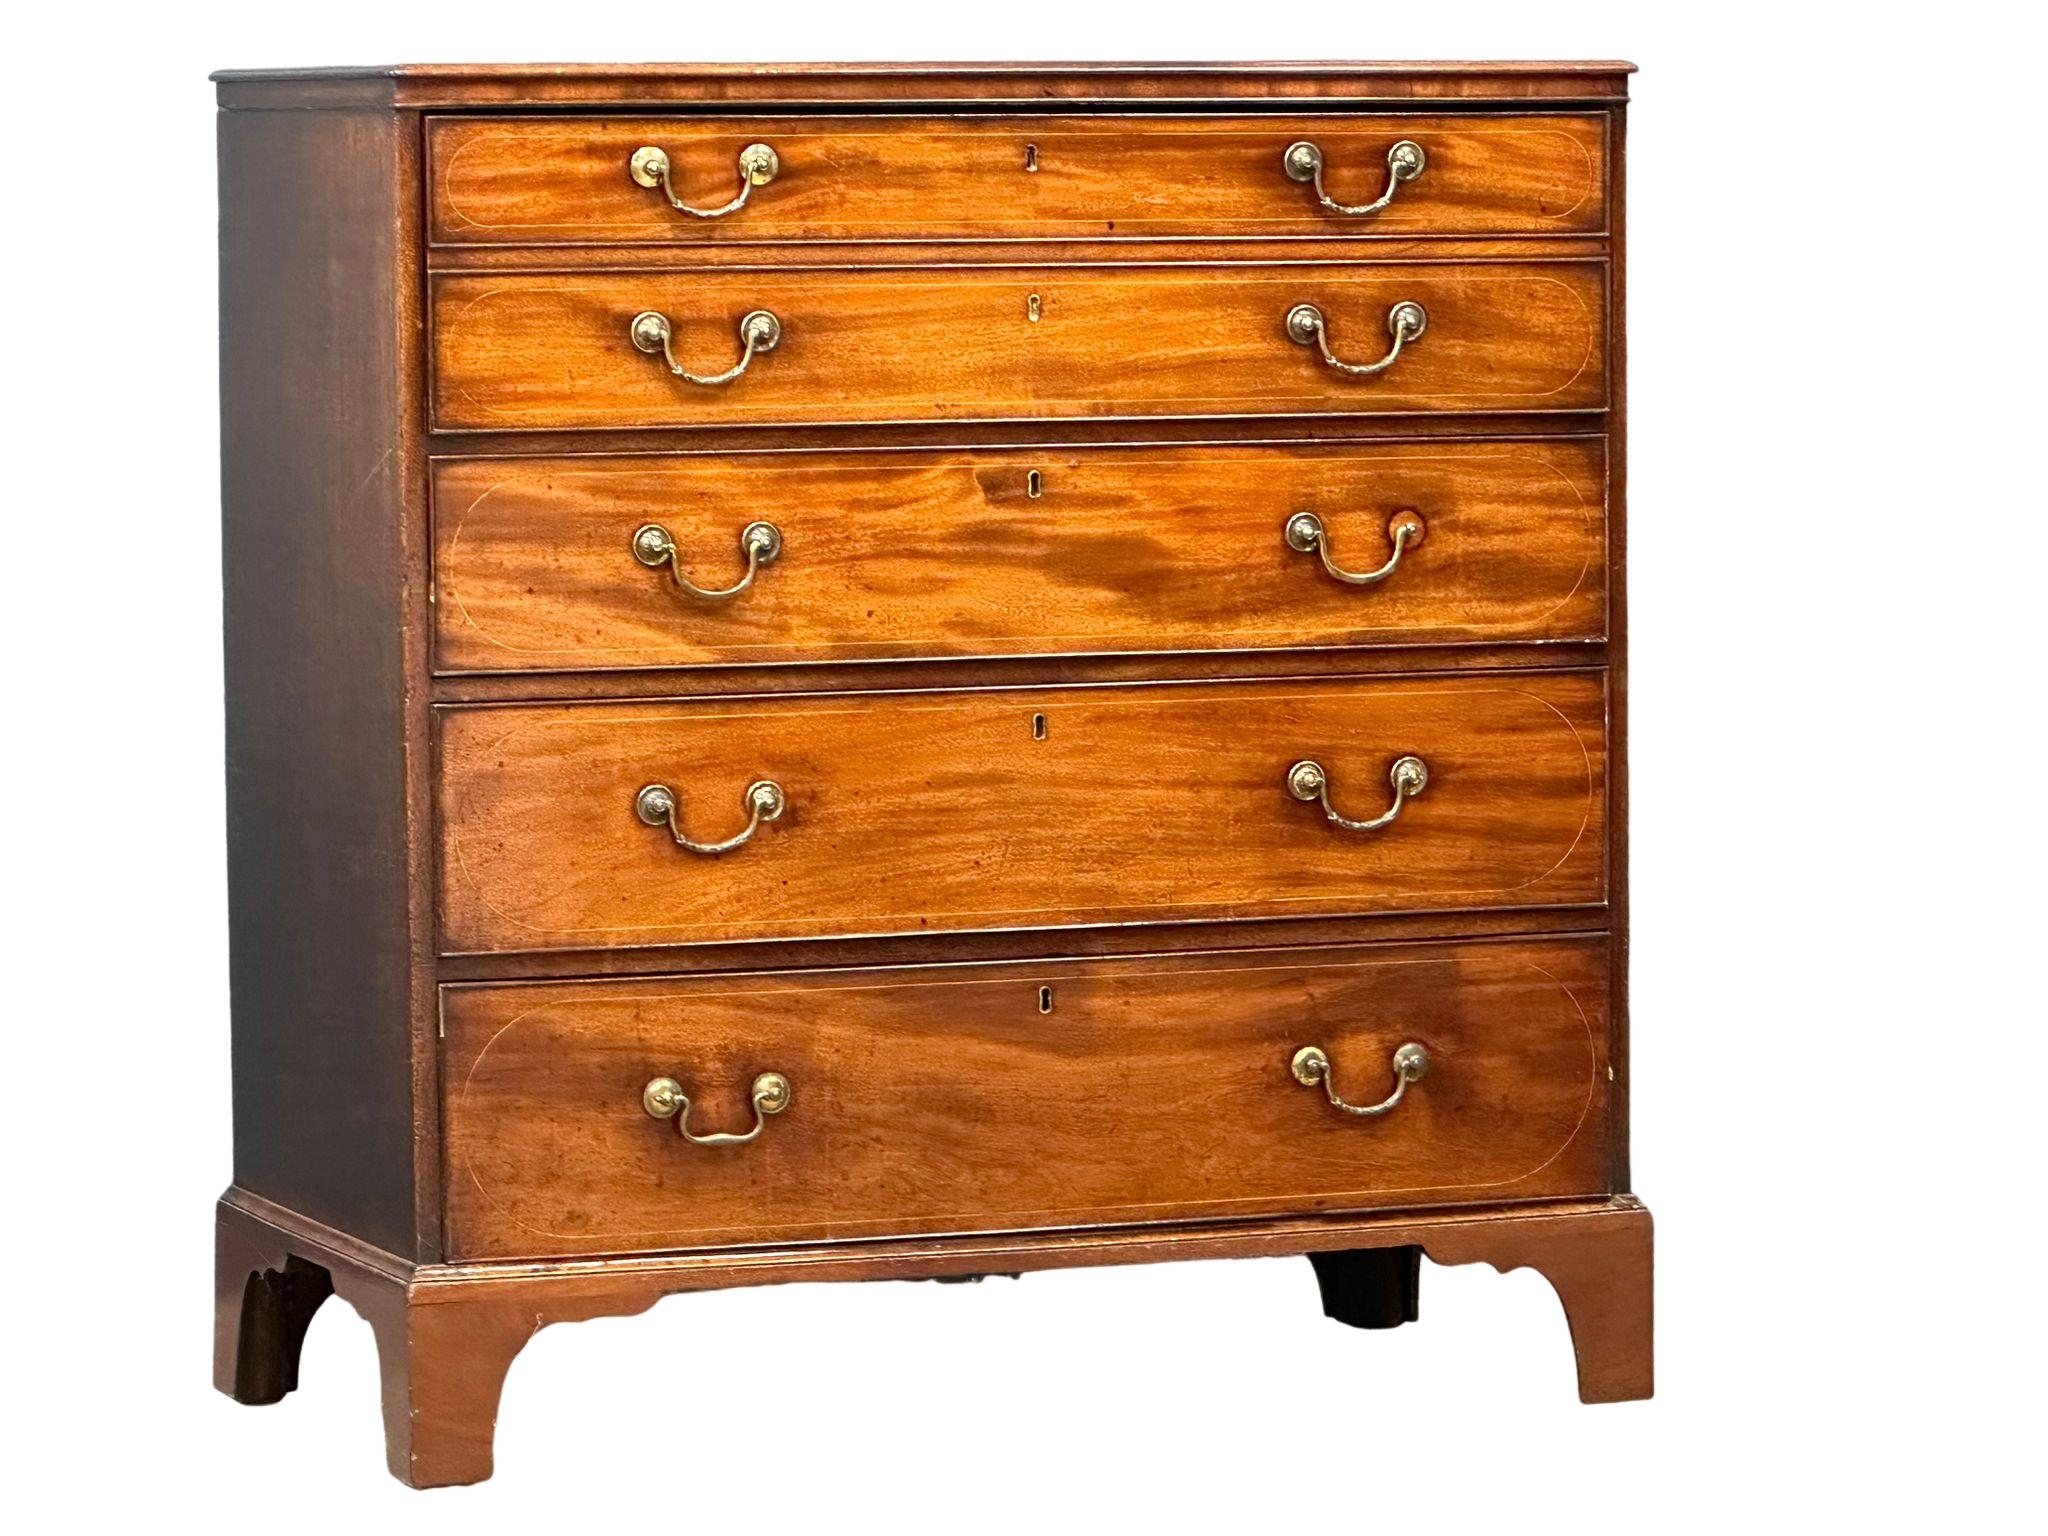 A good quality George III inlaid mahogany secretaire chest of drawers with original brass drop